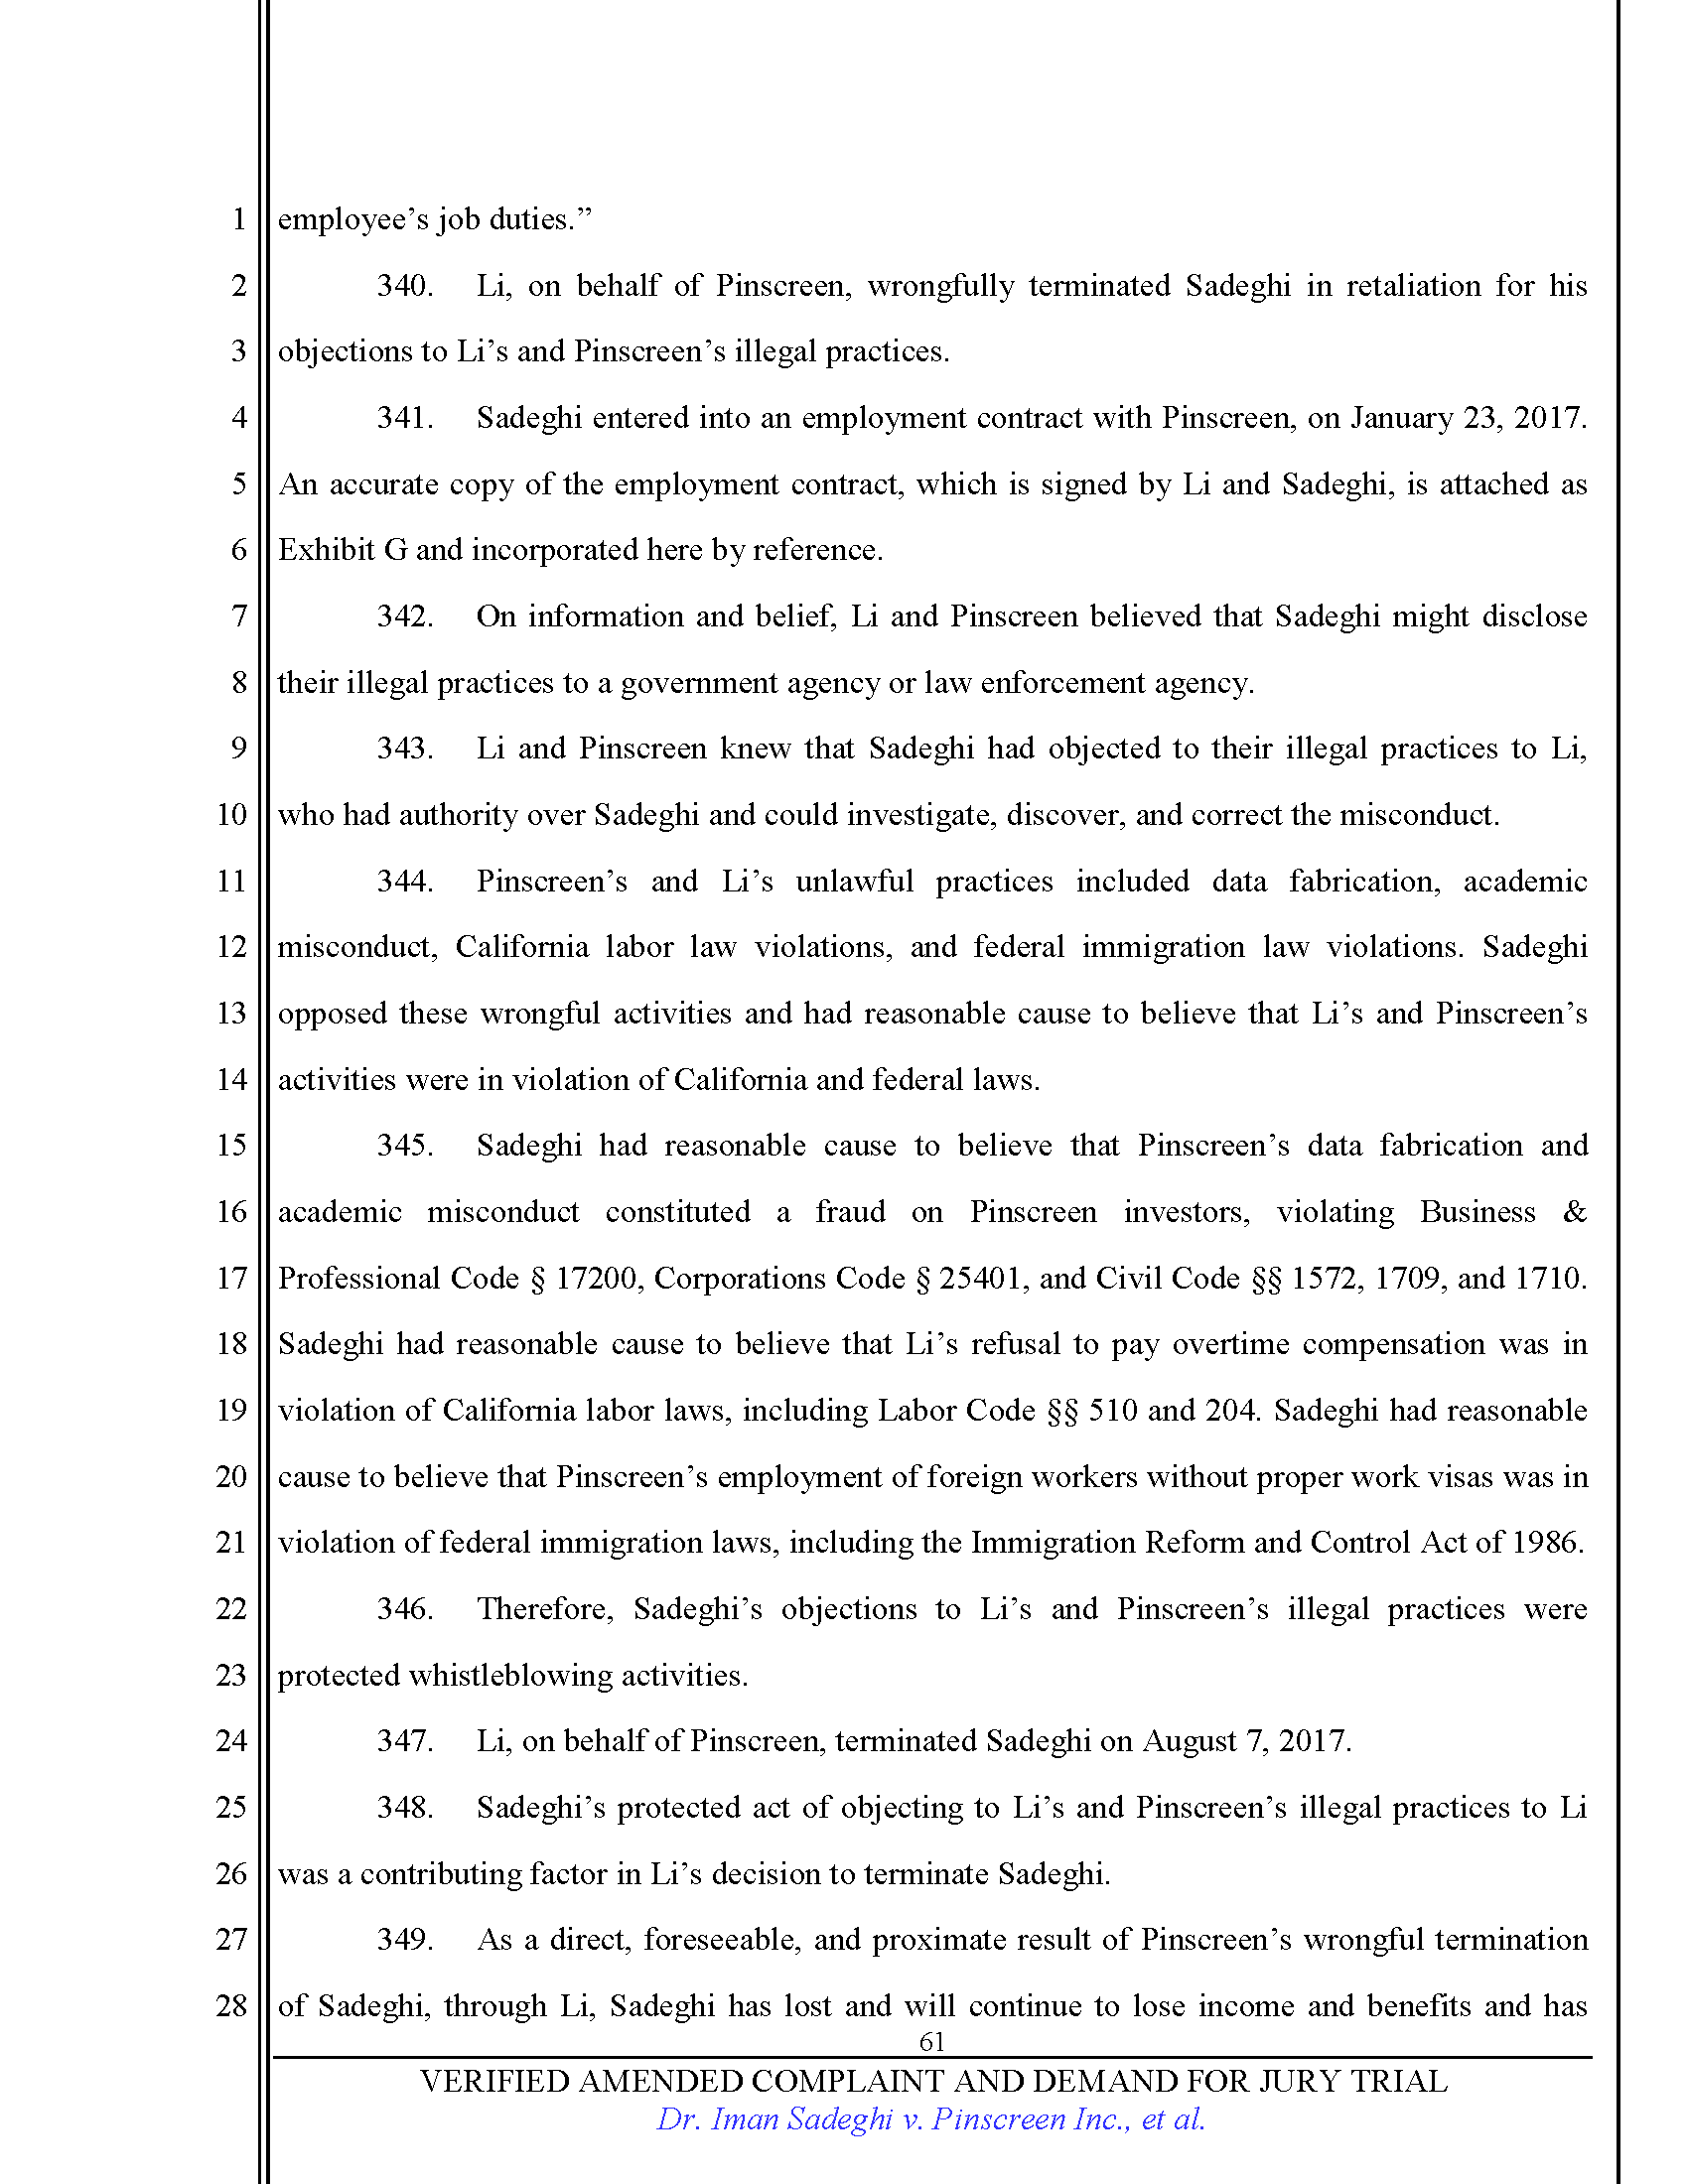 First Amended Complaint (FAC) Page 61